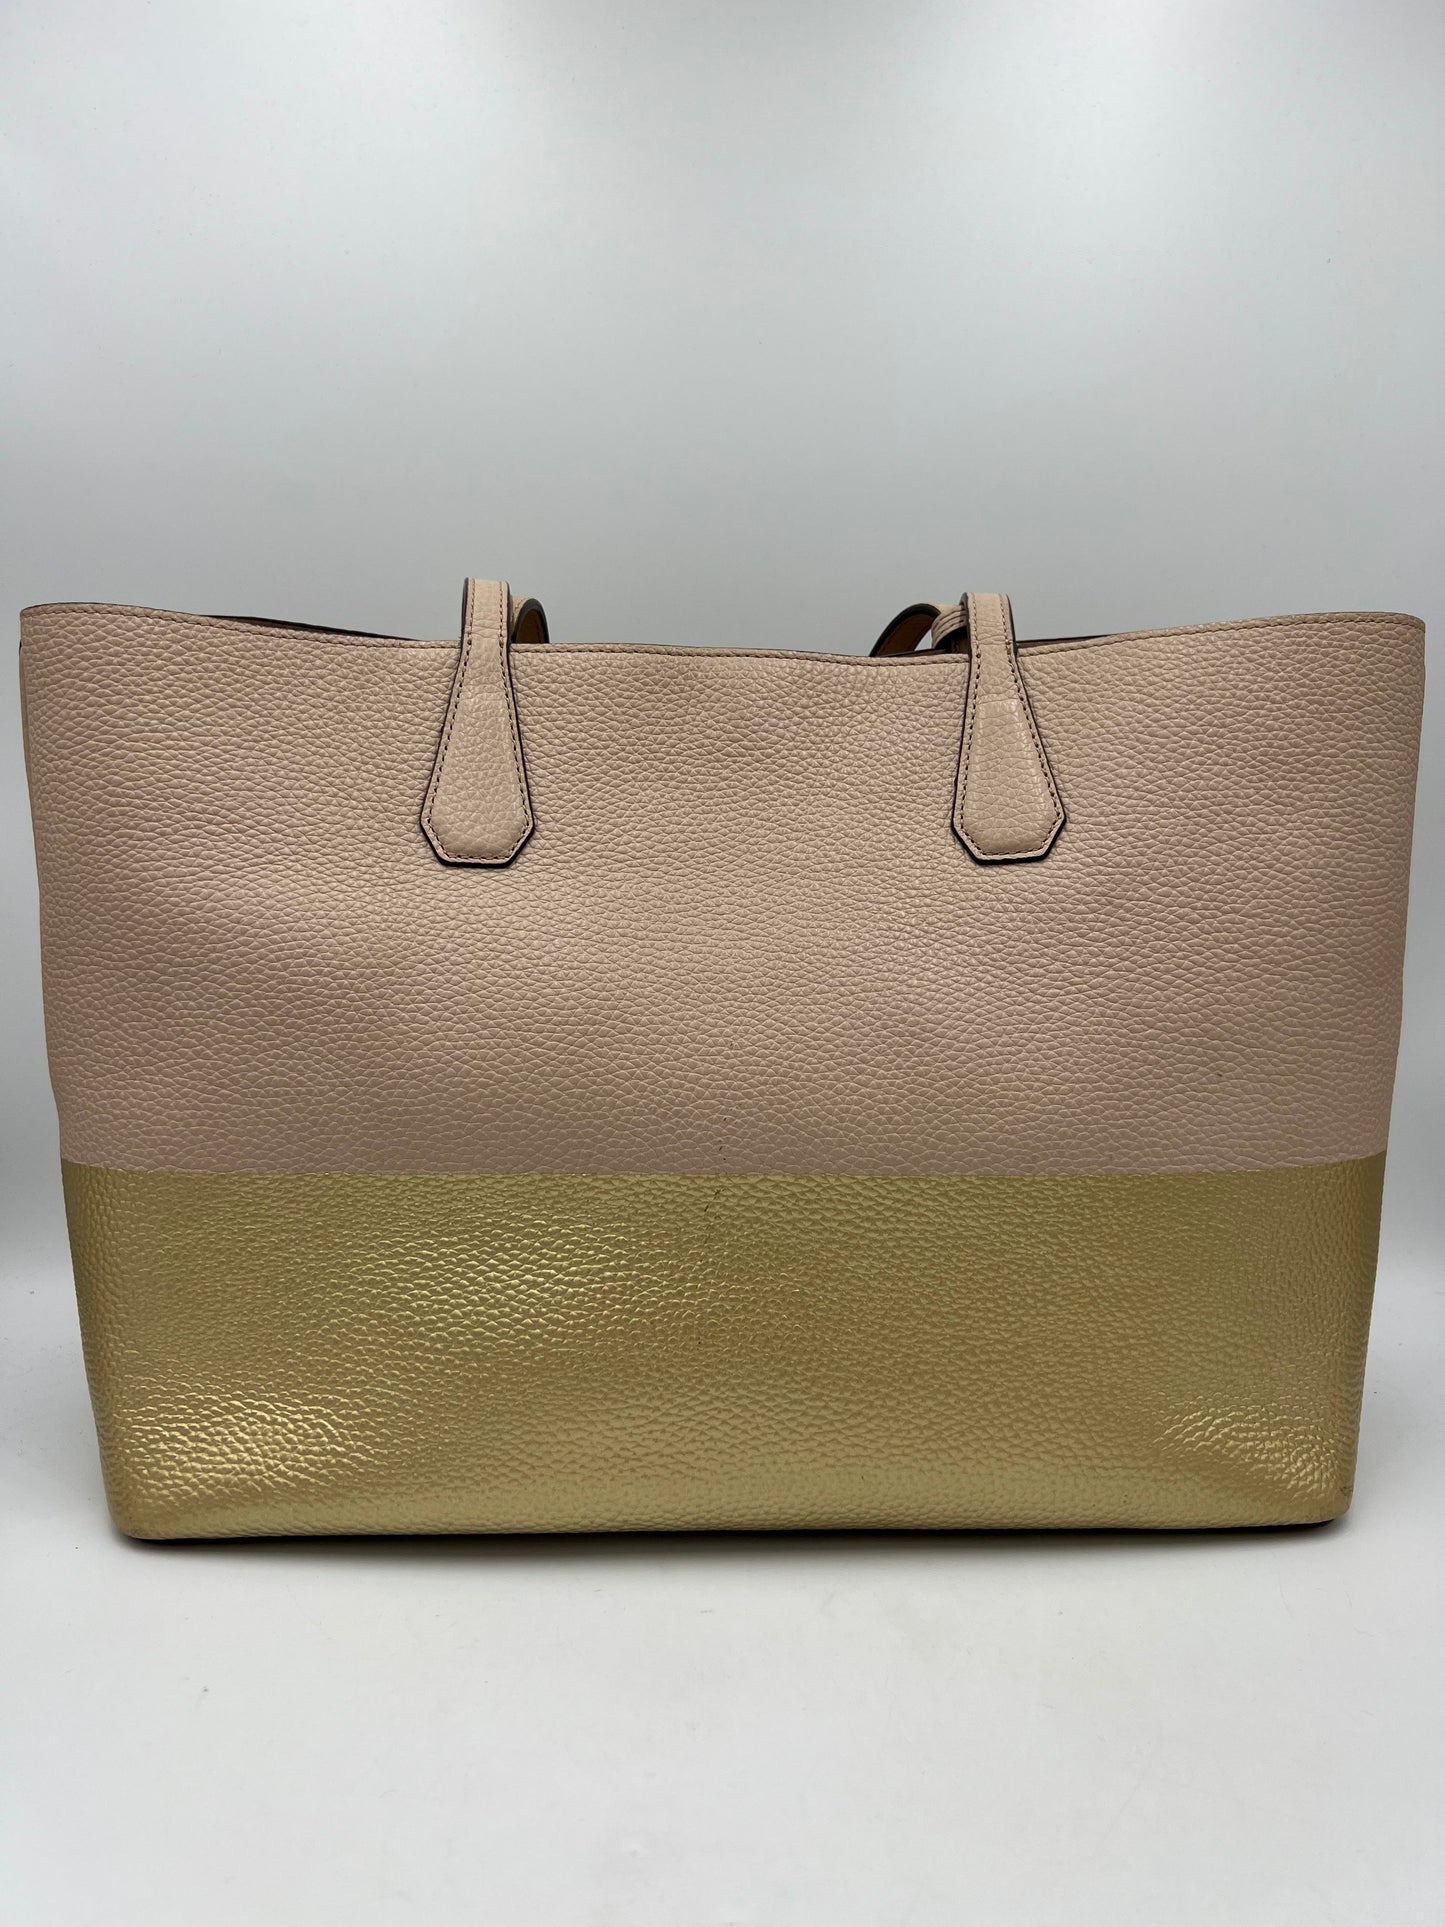 Tory Burch Pebbled Leather Tote